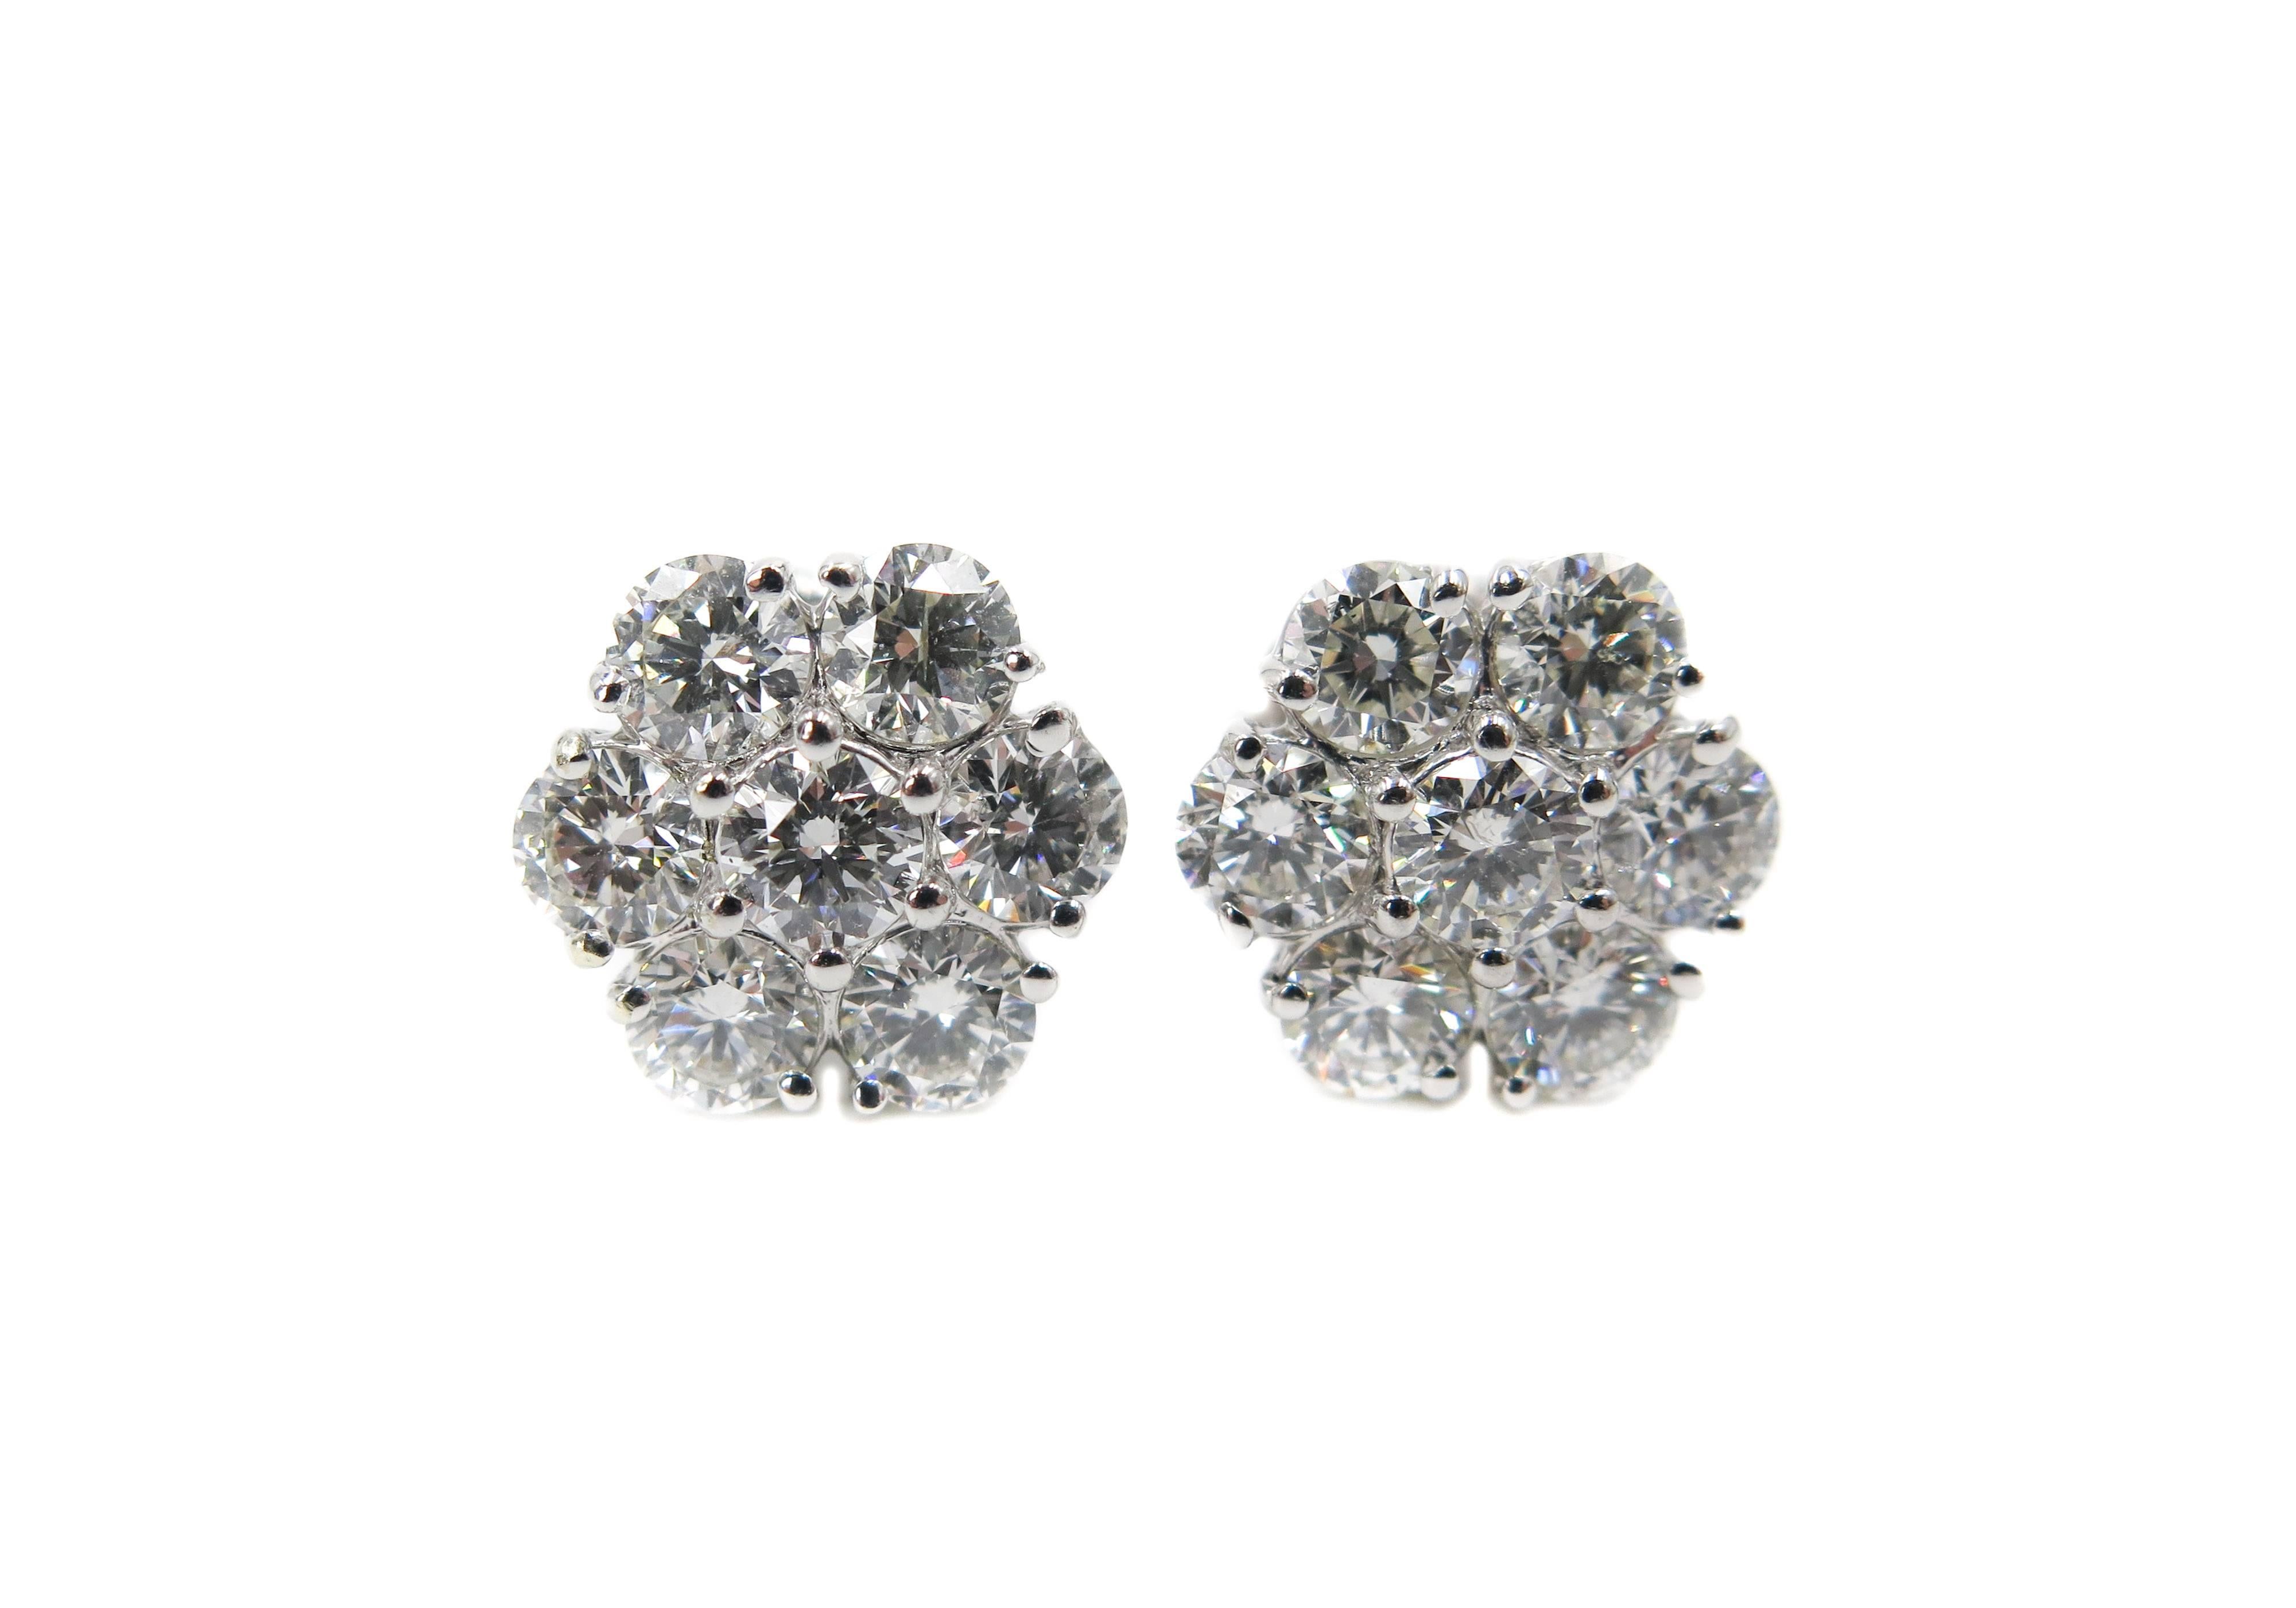 Diamond flower cluster stud earrings in 18k white gold. 
Fourteen matching near-colorless round brilliant-cut diamonds weighing 4.70 carats total. 
12 round diamonds 4.20 carats and 2 round diamonds in the center 0.50 carats (0.25 carats each). 
The